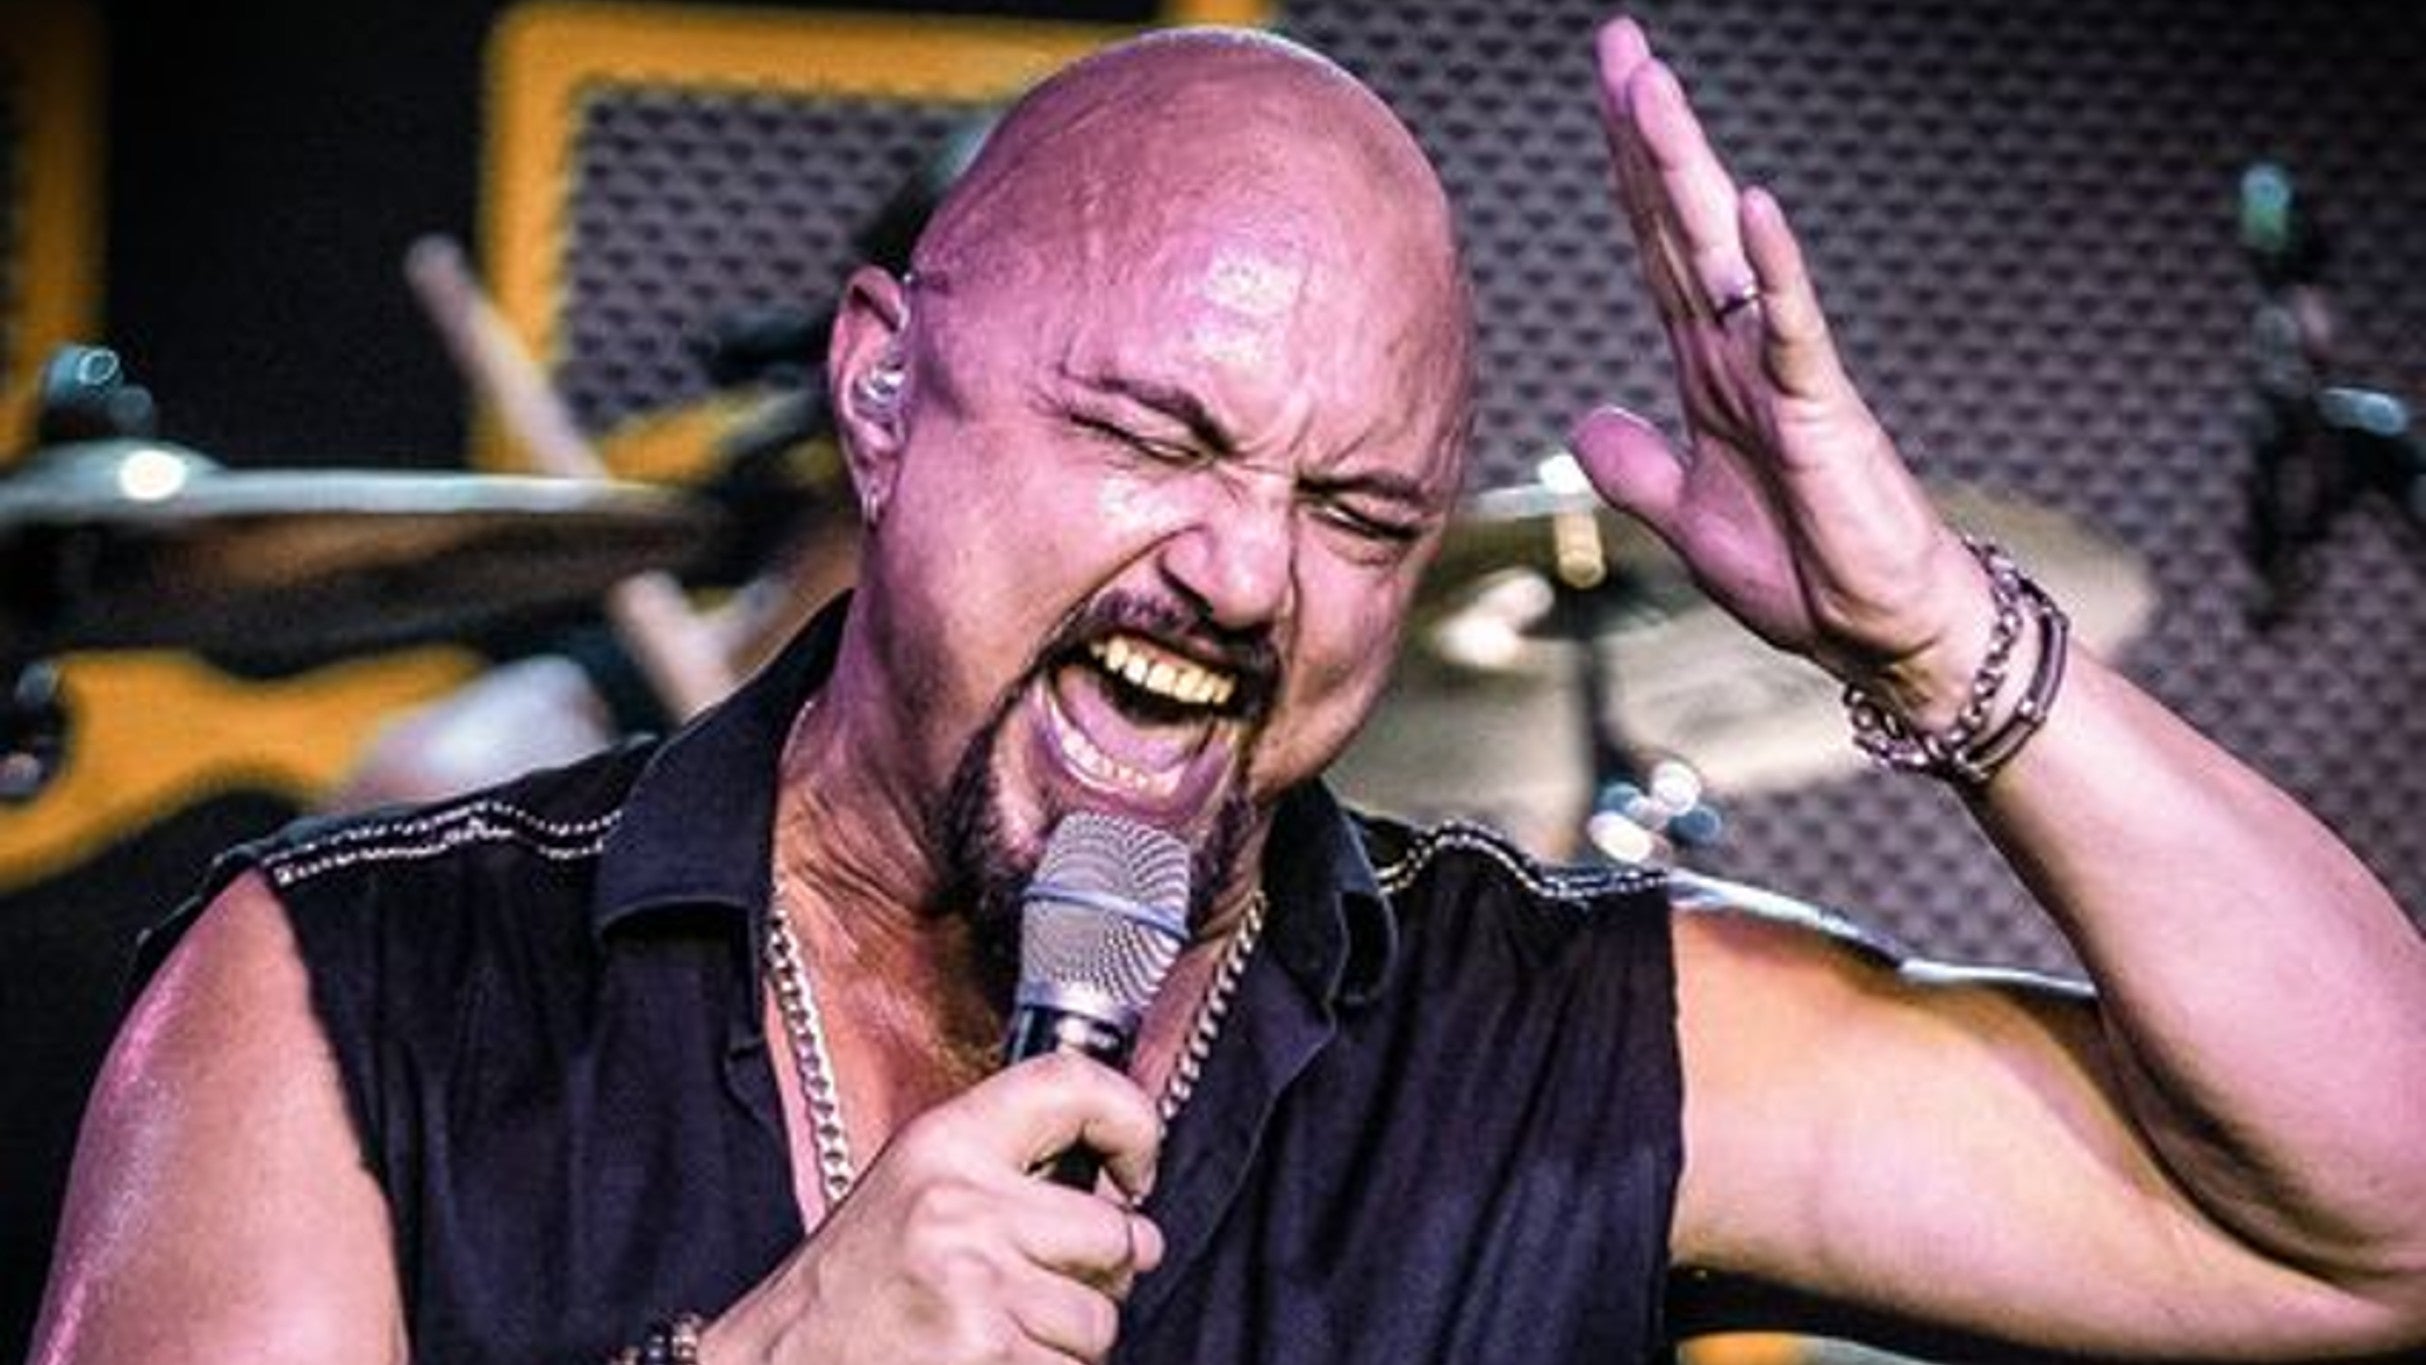 Geoff Tate free presale code for early tickets in San Antonio